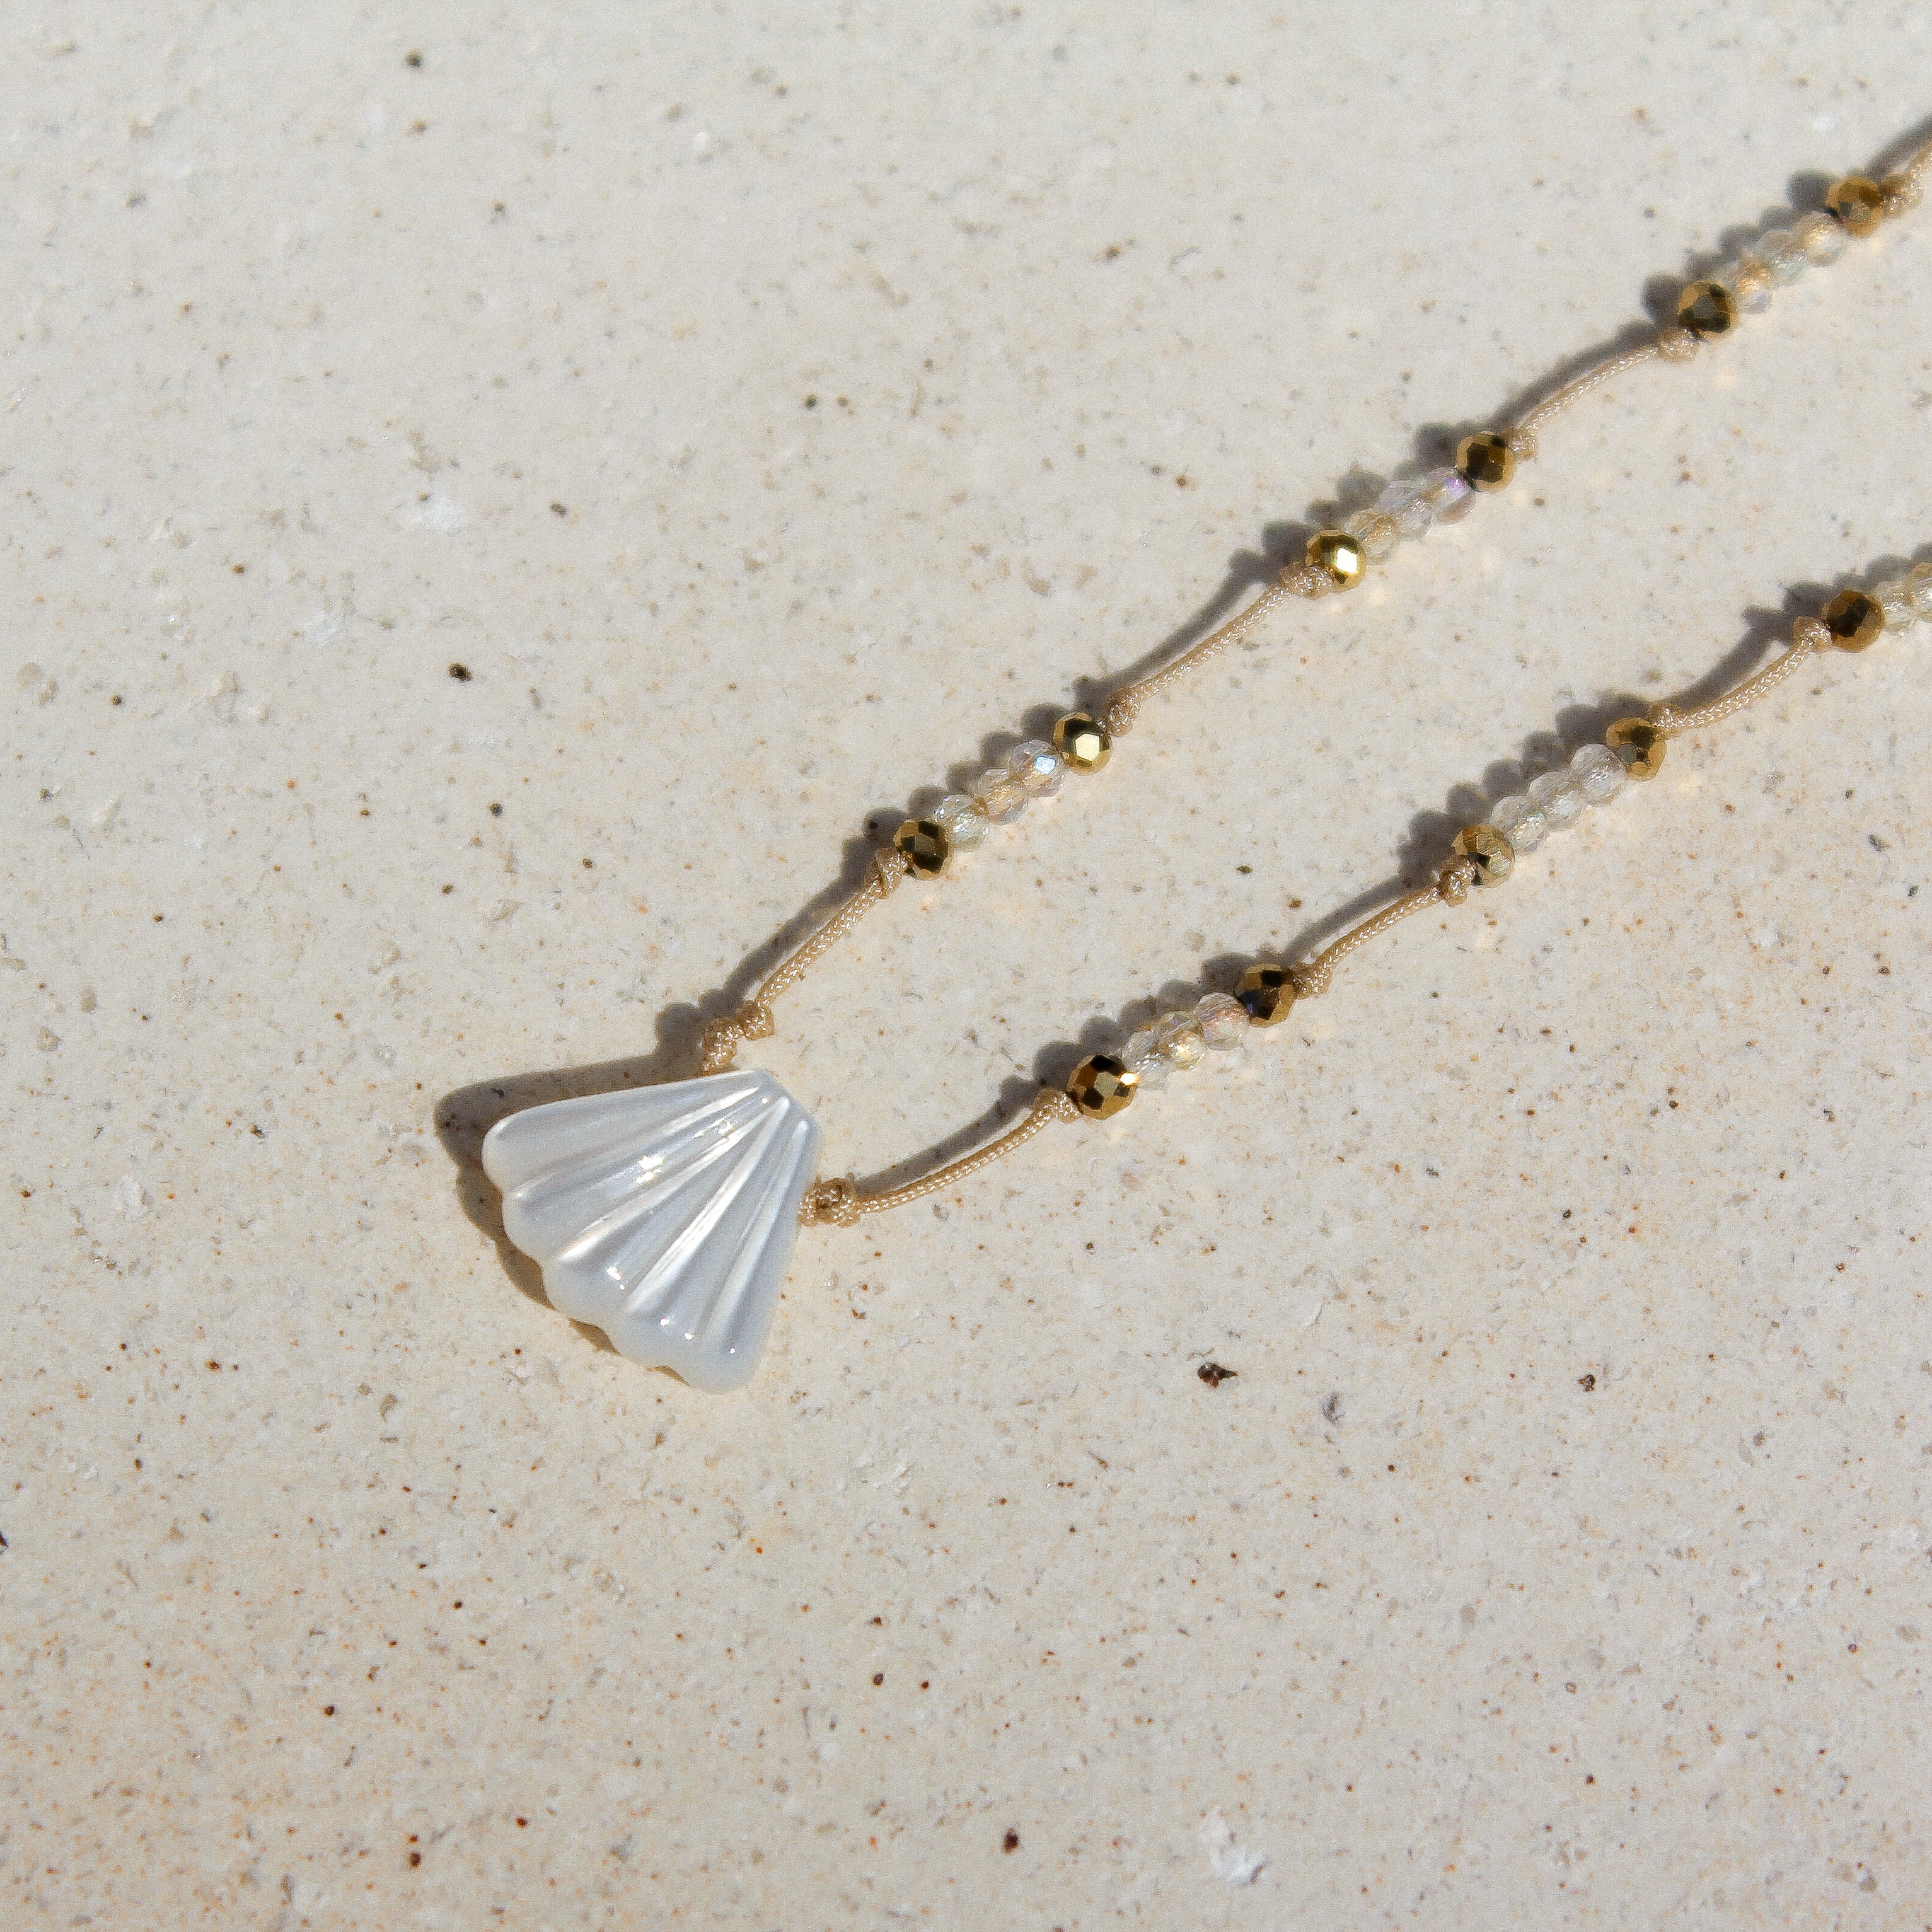 MERMAID ANKLET - MOTHER OF PEARL SHELL & BEADS